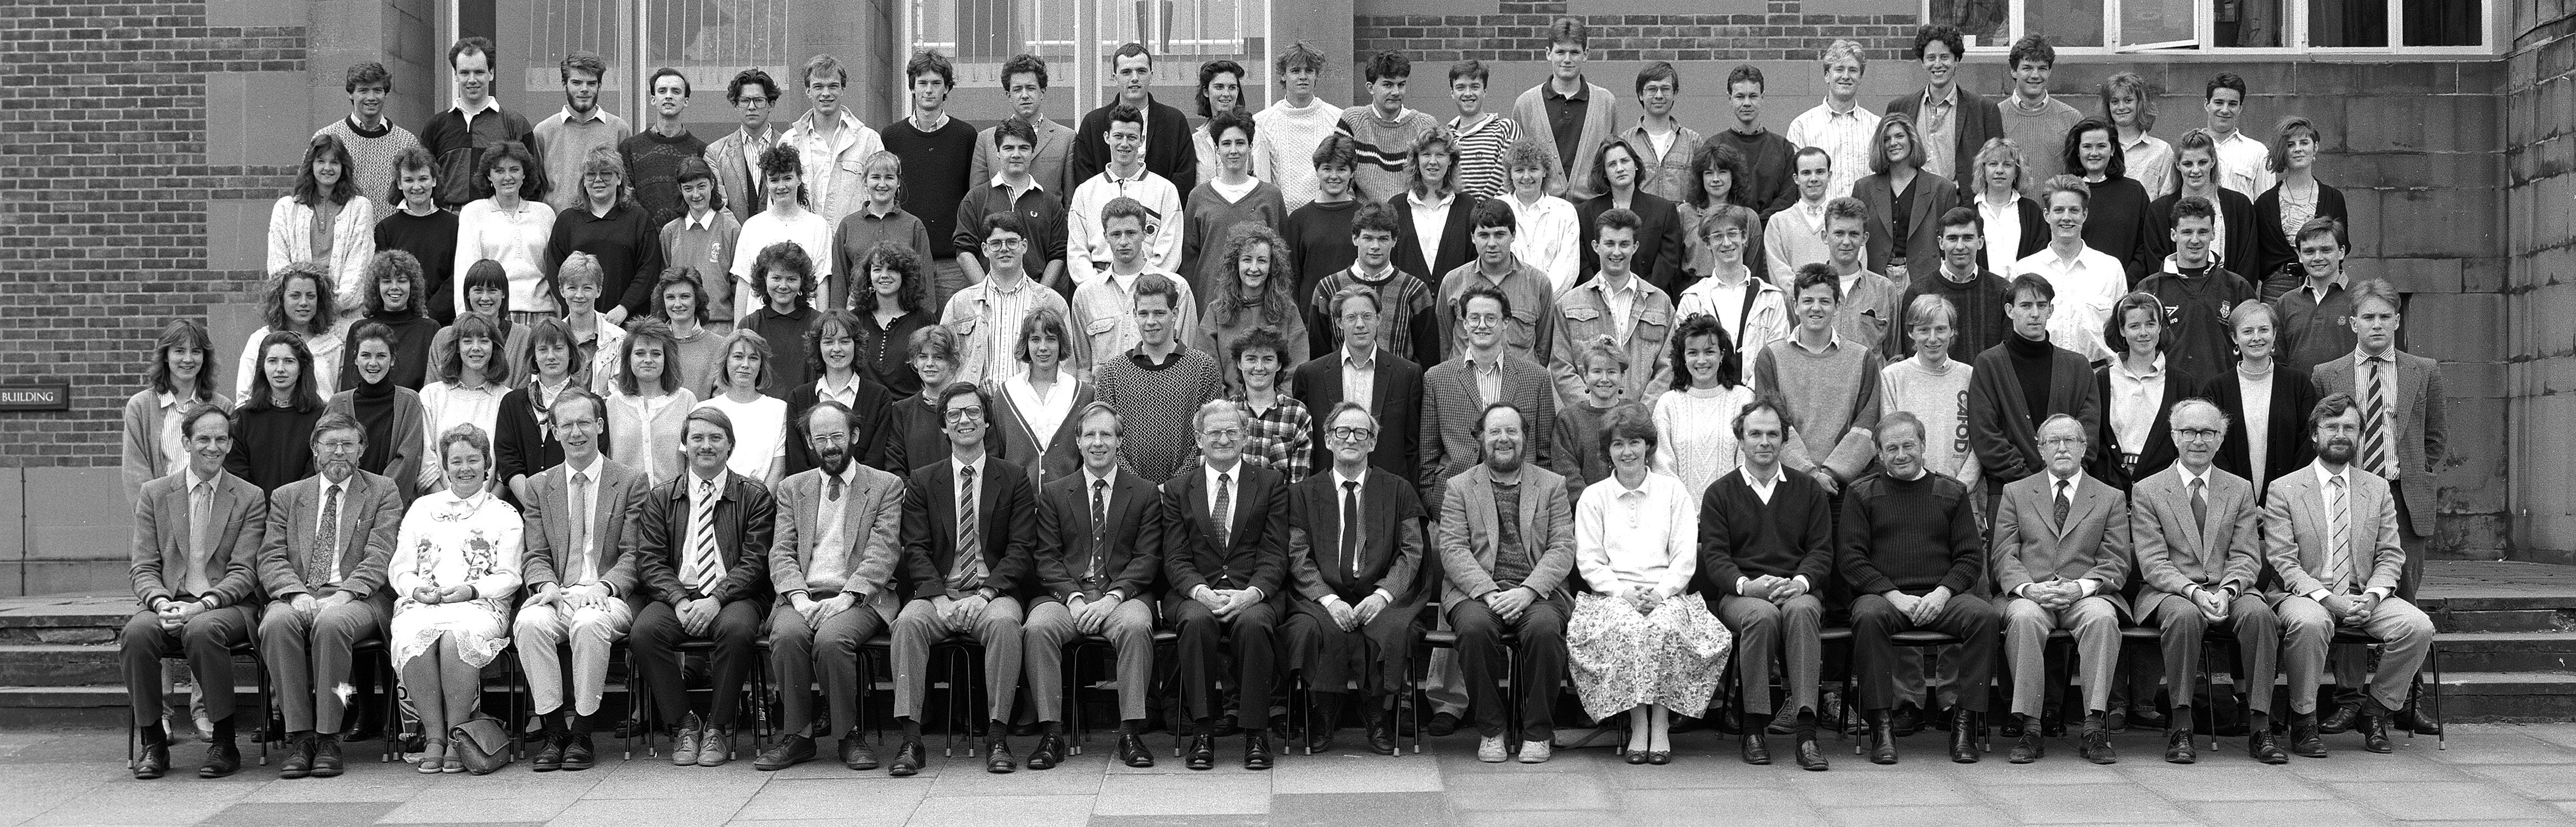 Geography Department Undergraduate Group photo from 1989